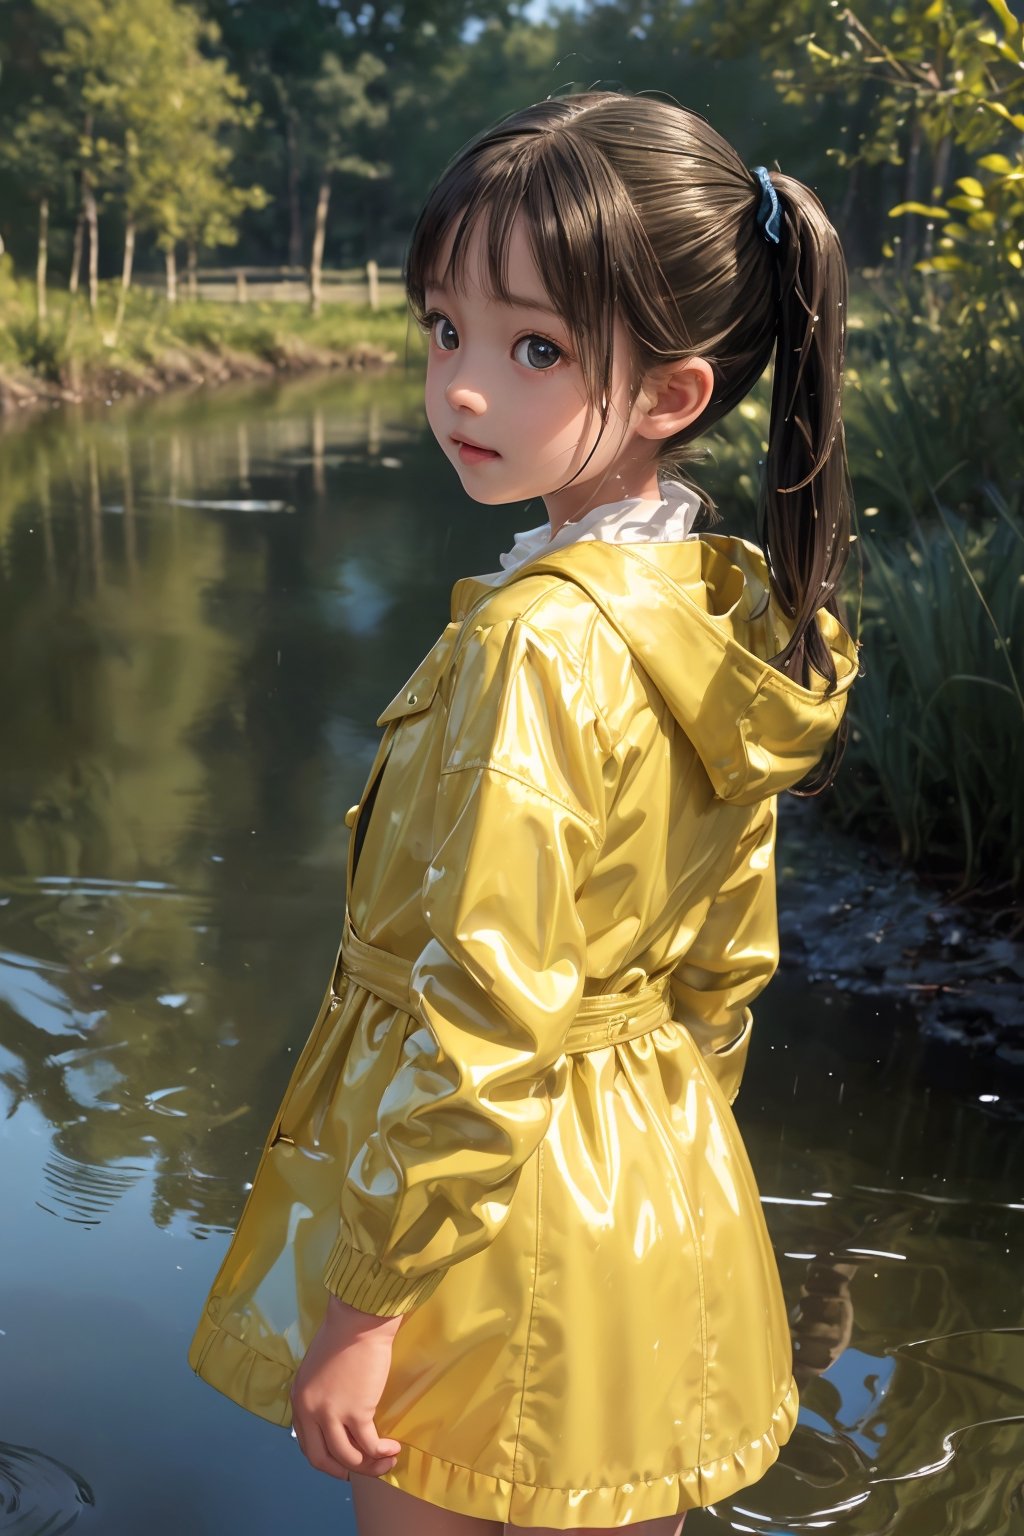 Masterpiece, top quality, very detailed, high resolution, very detailed textured skin, detailed light, Realistic, Photorealistic, very delicate and beautiful,A curious little girl with pigtails and a bright yellow raincoat exploring the riverbank, her reflection dancing in the rippling water.
, (smile: 0.8), look back